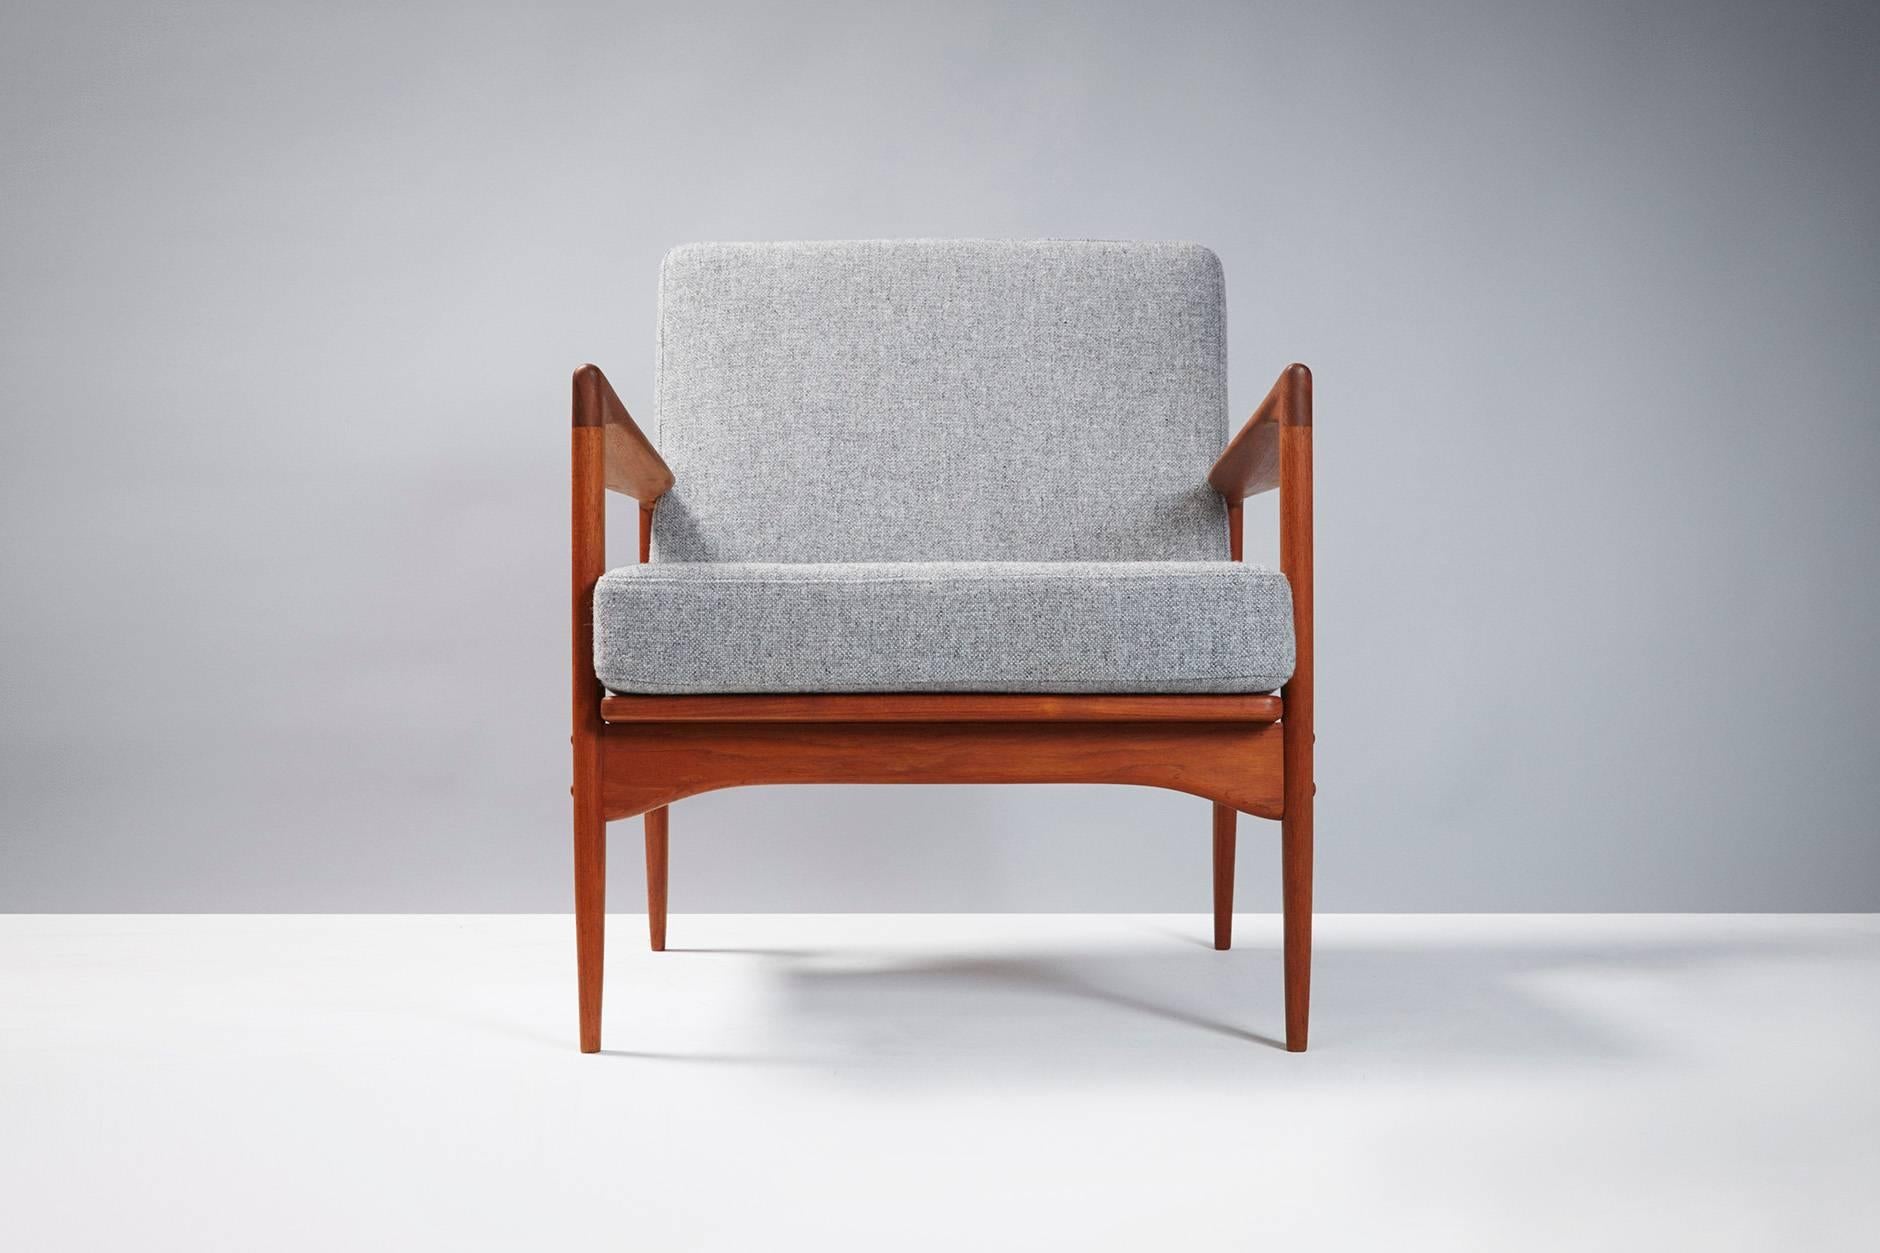 Ib Kofod-Larsen

'Candidate' lounge chair, circa 1960

Teak lounge chair produced by OPE, Sweden, circa 1960. New cushions reupholstered in Kvadrat Hallingdal #130 wool fabric.